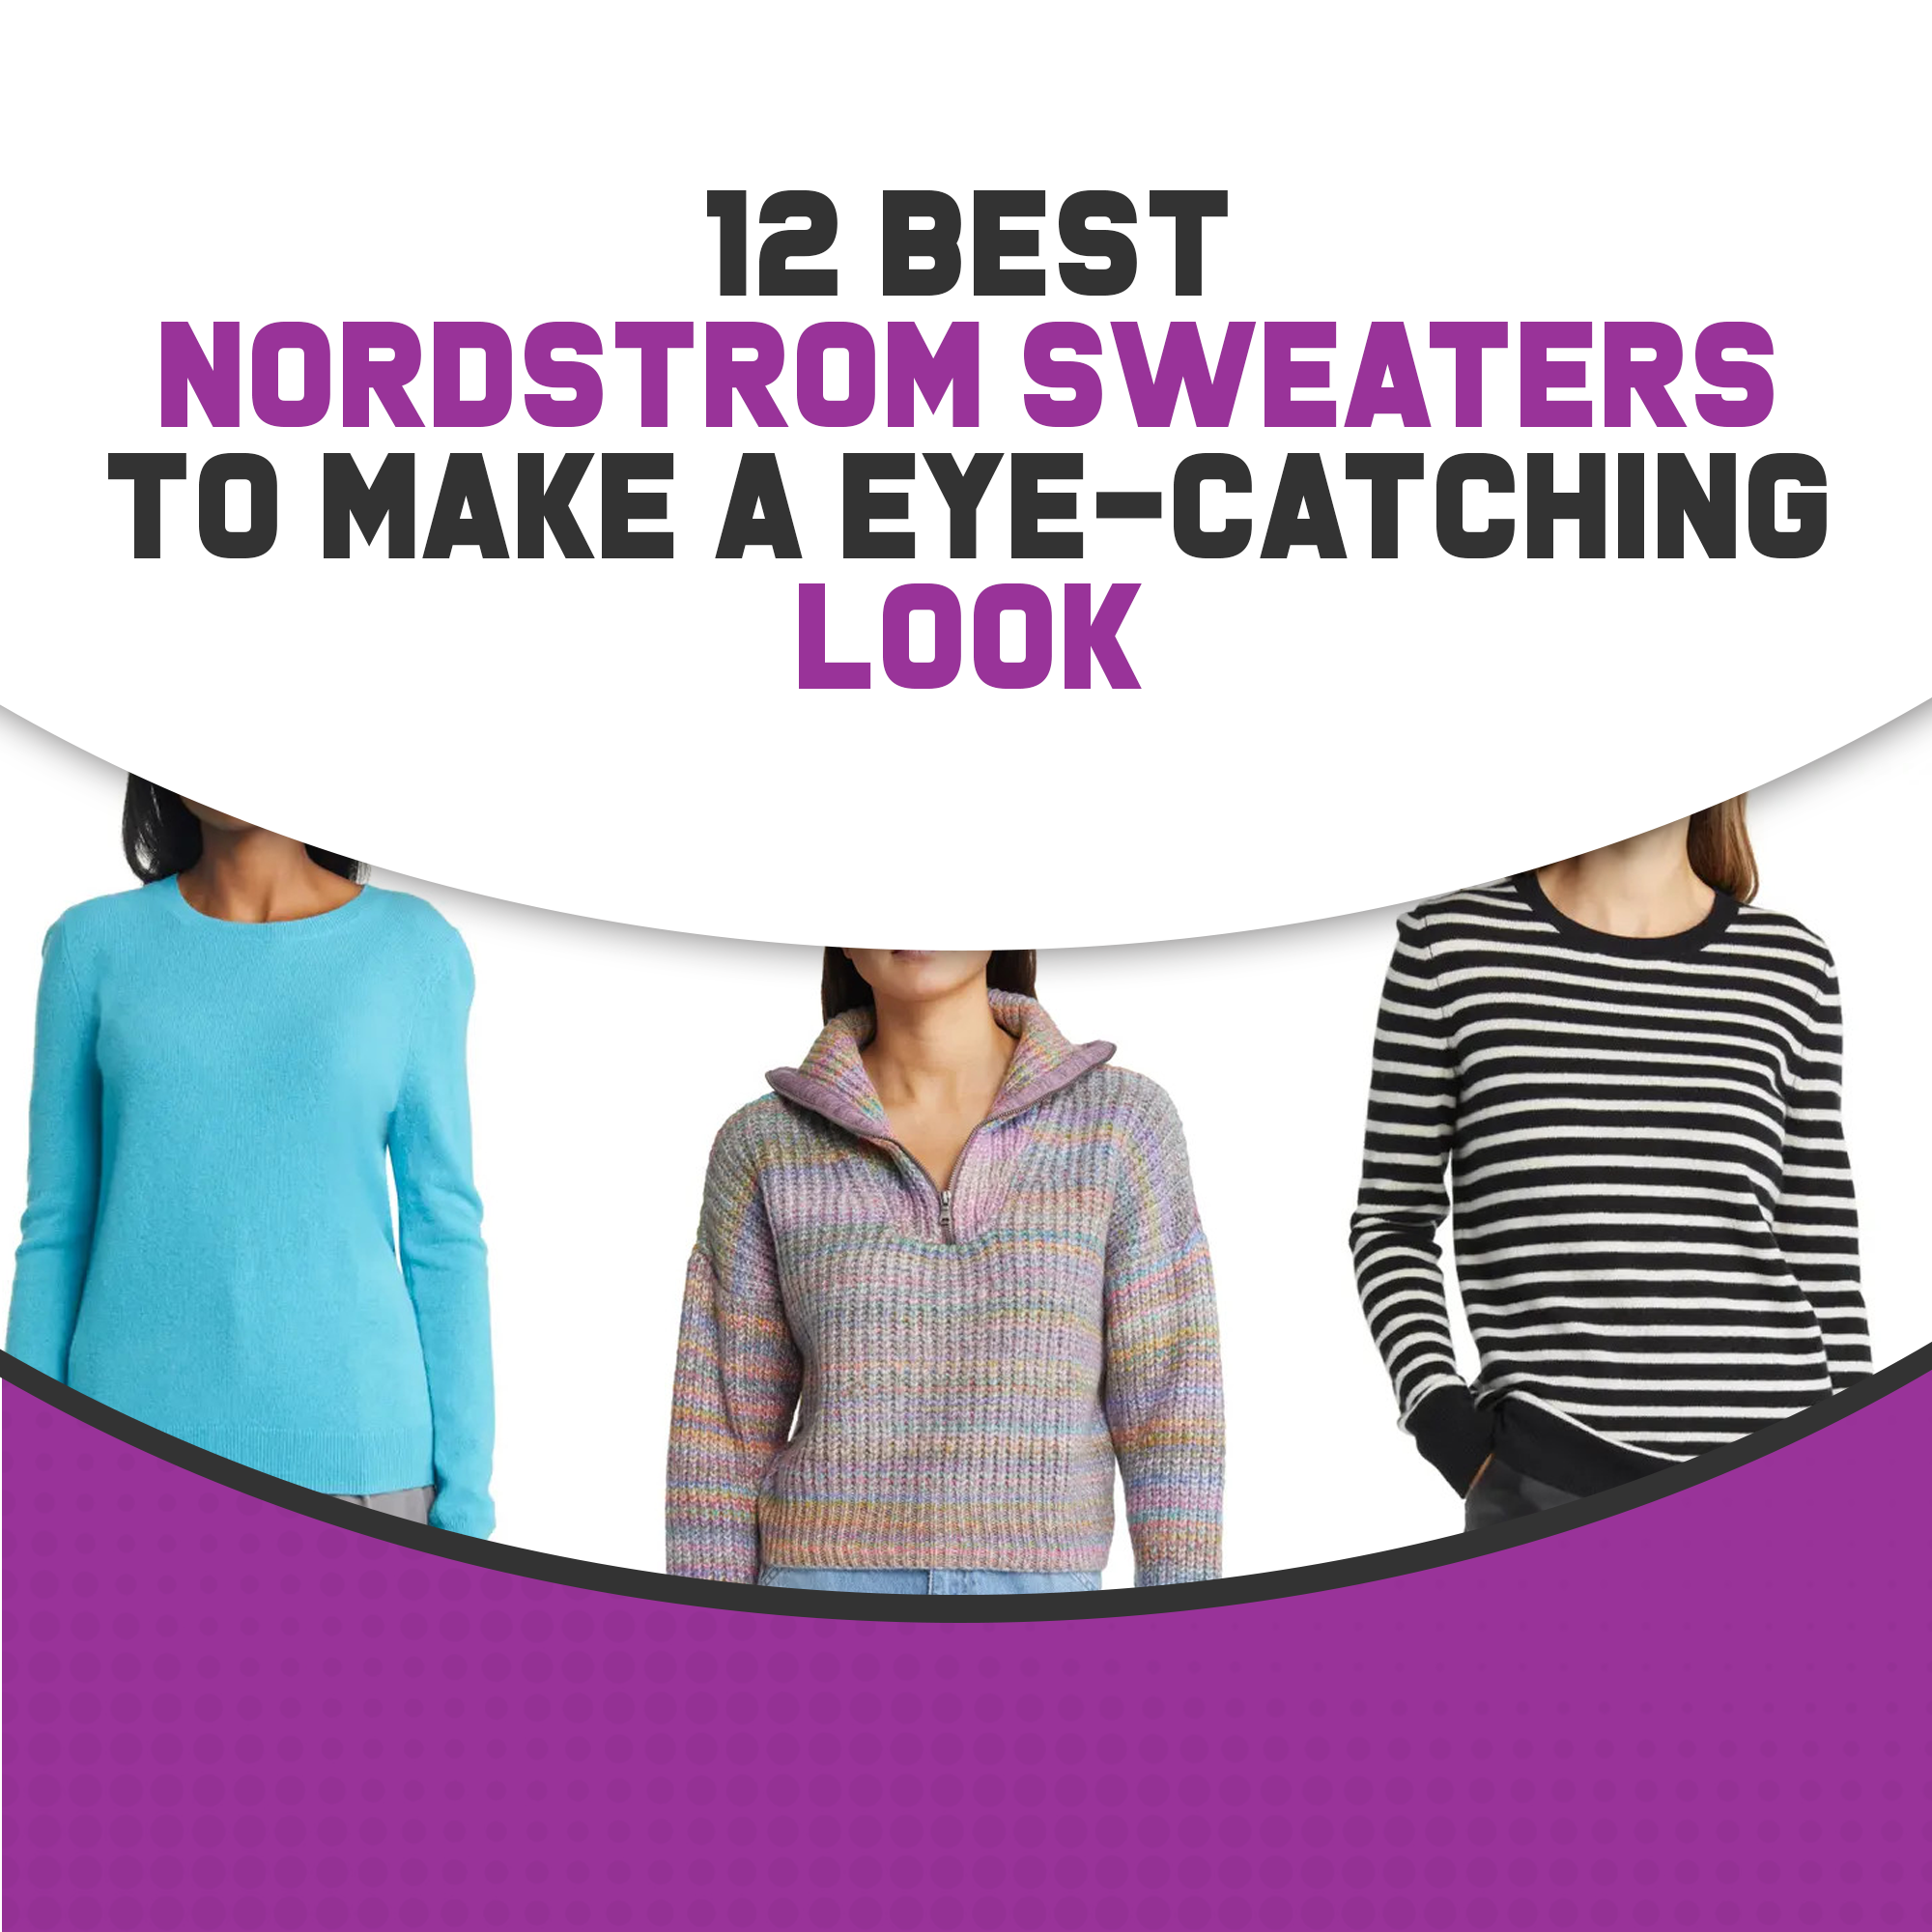 12 Best Nordstrom Sweaters To Make A Eye-Catching Look